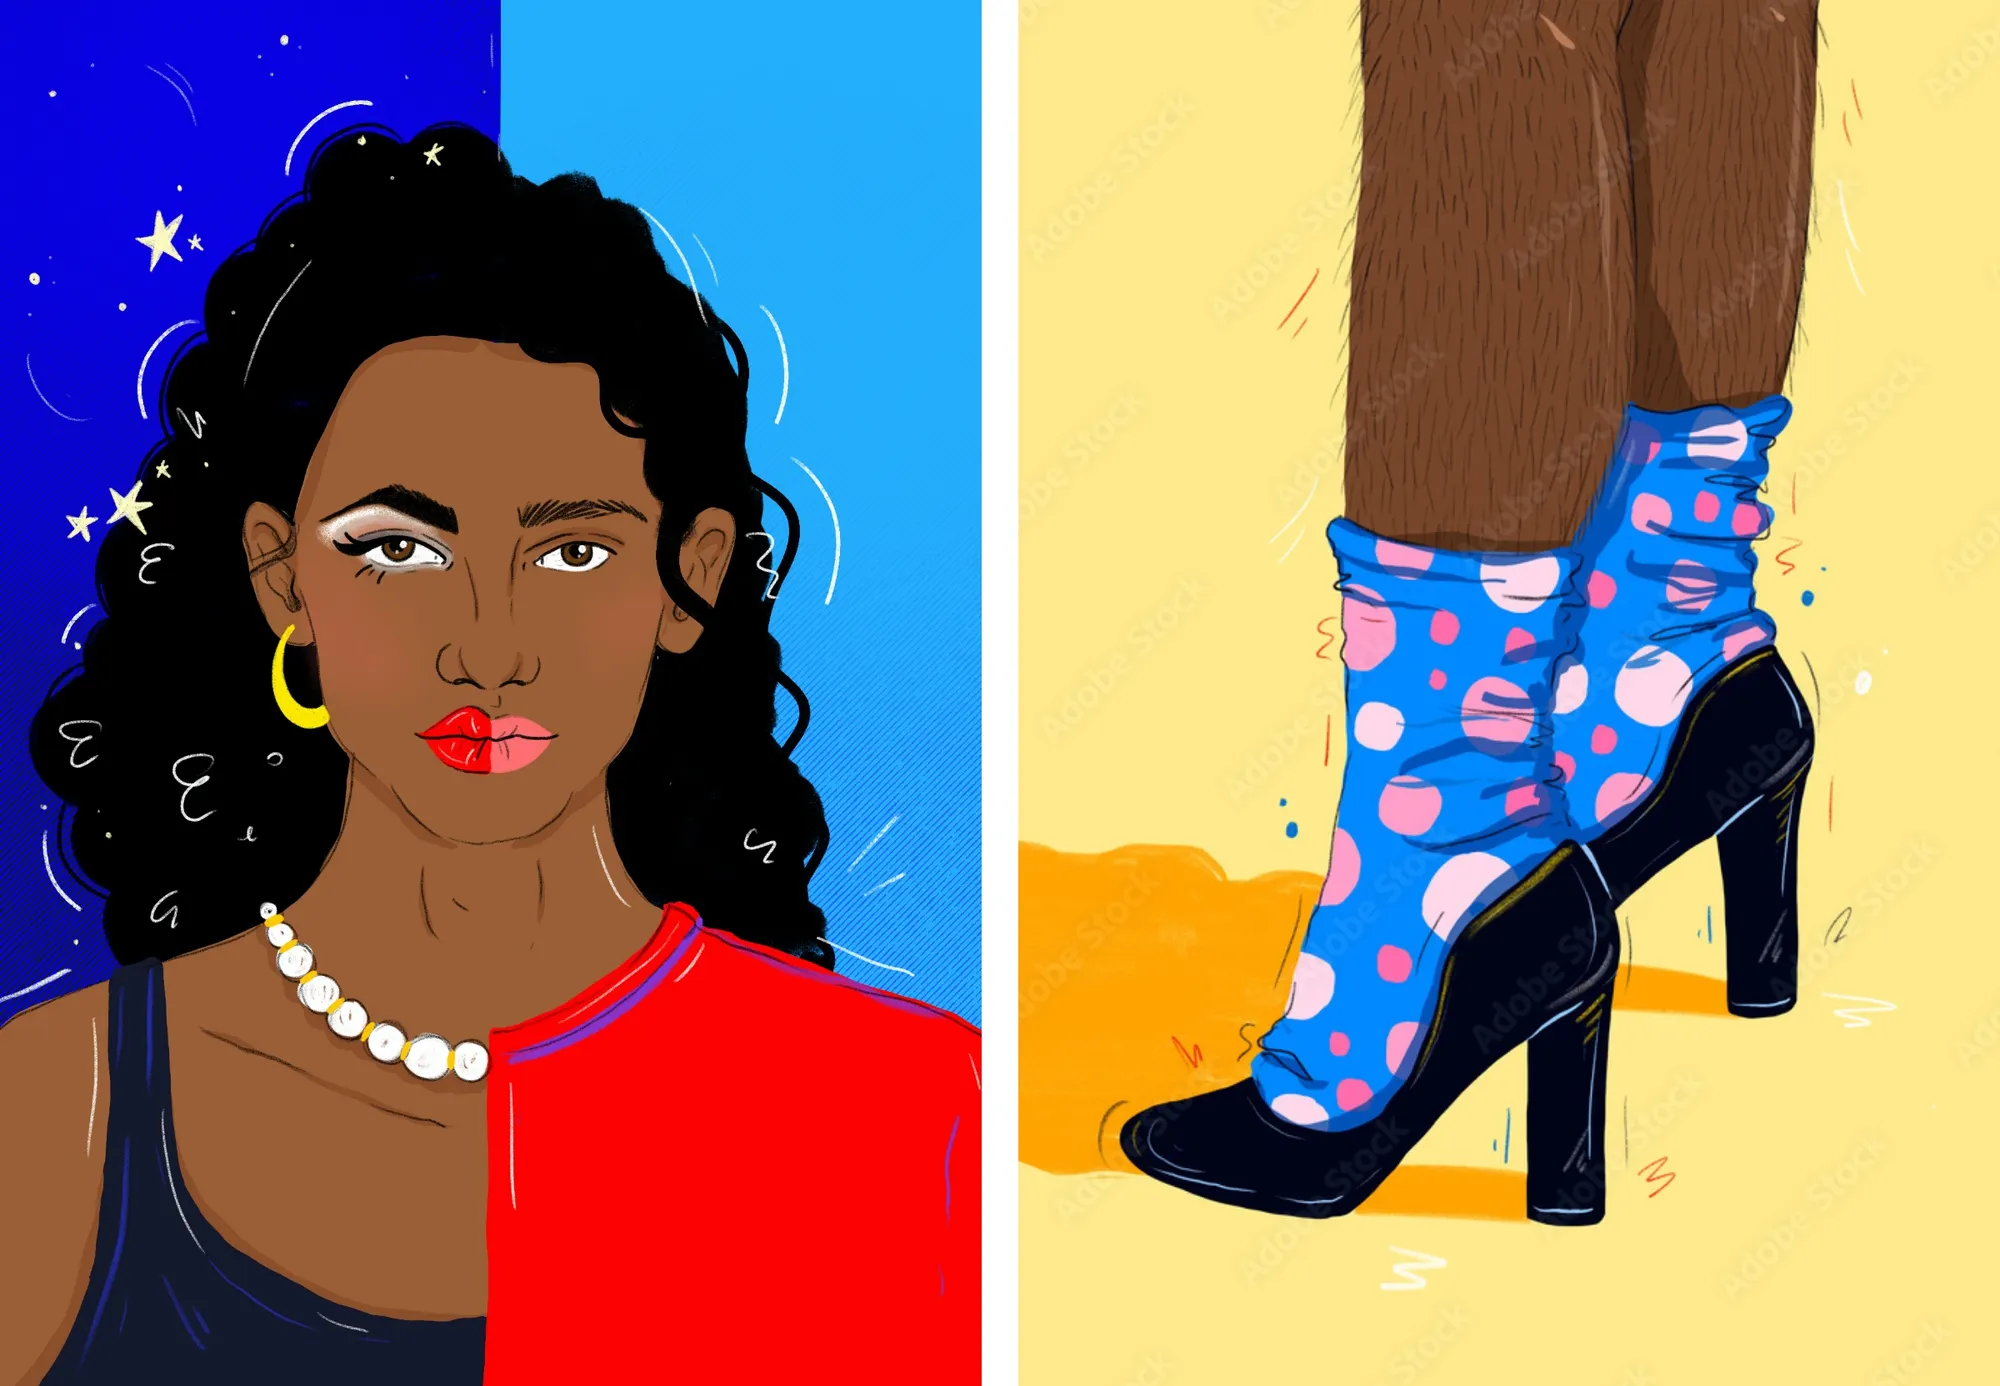 Left image: portrait showing a face divided in two halves. Right image:male feet in high heels.